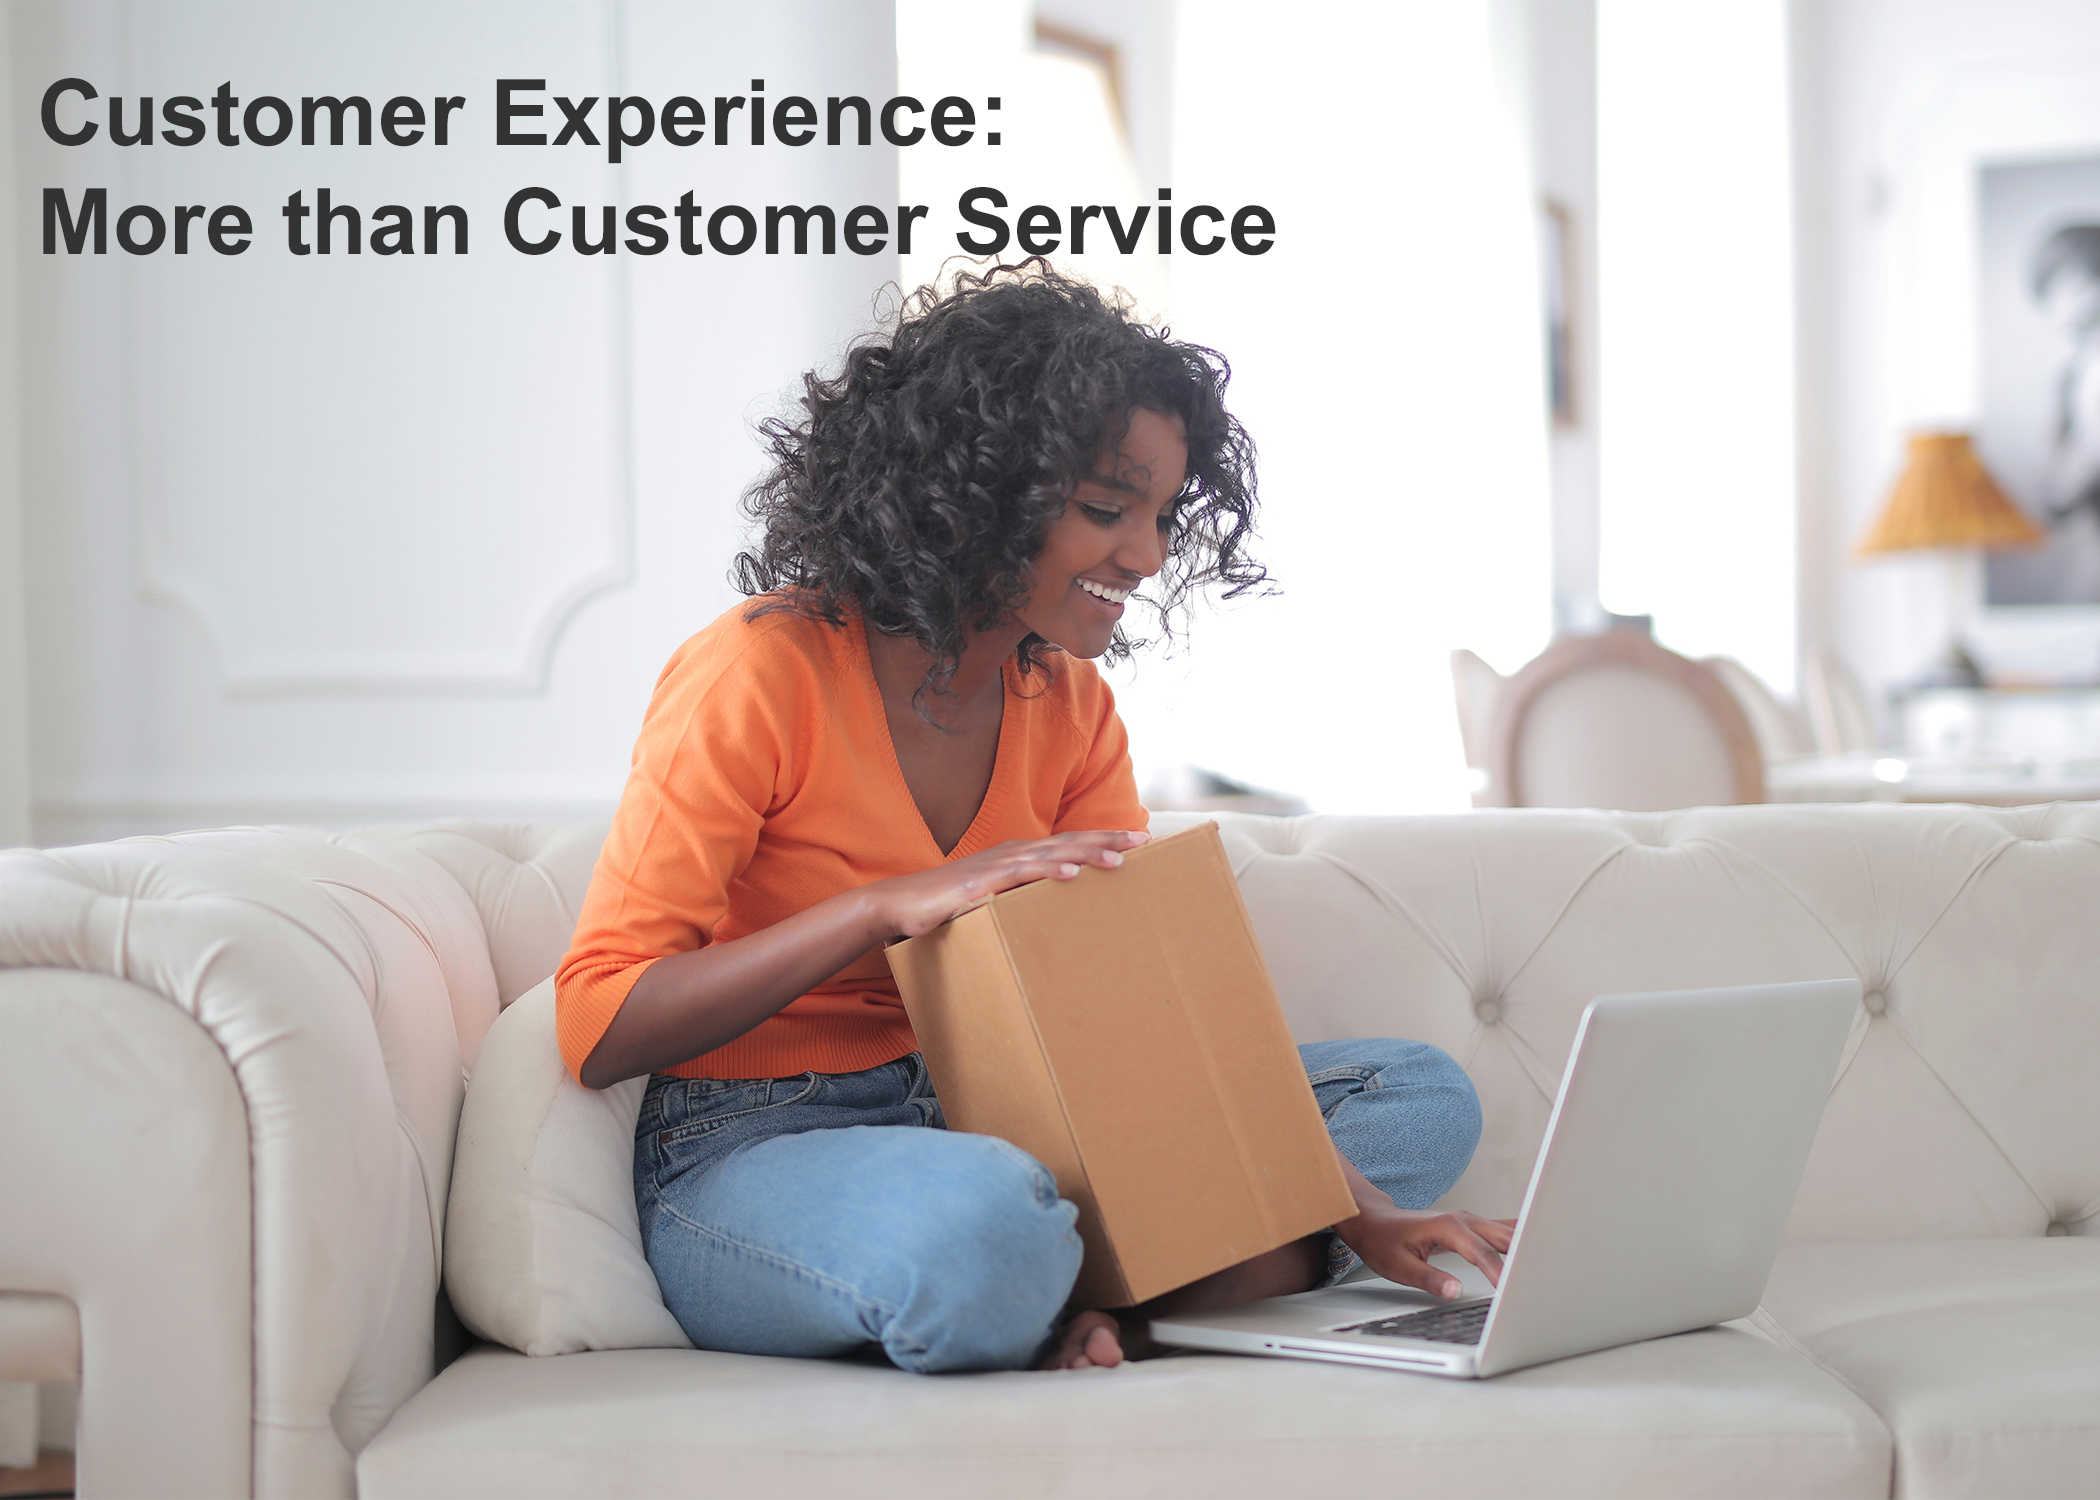 Customer Experience: More than Customer Service